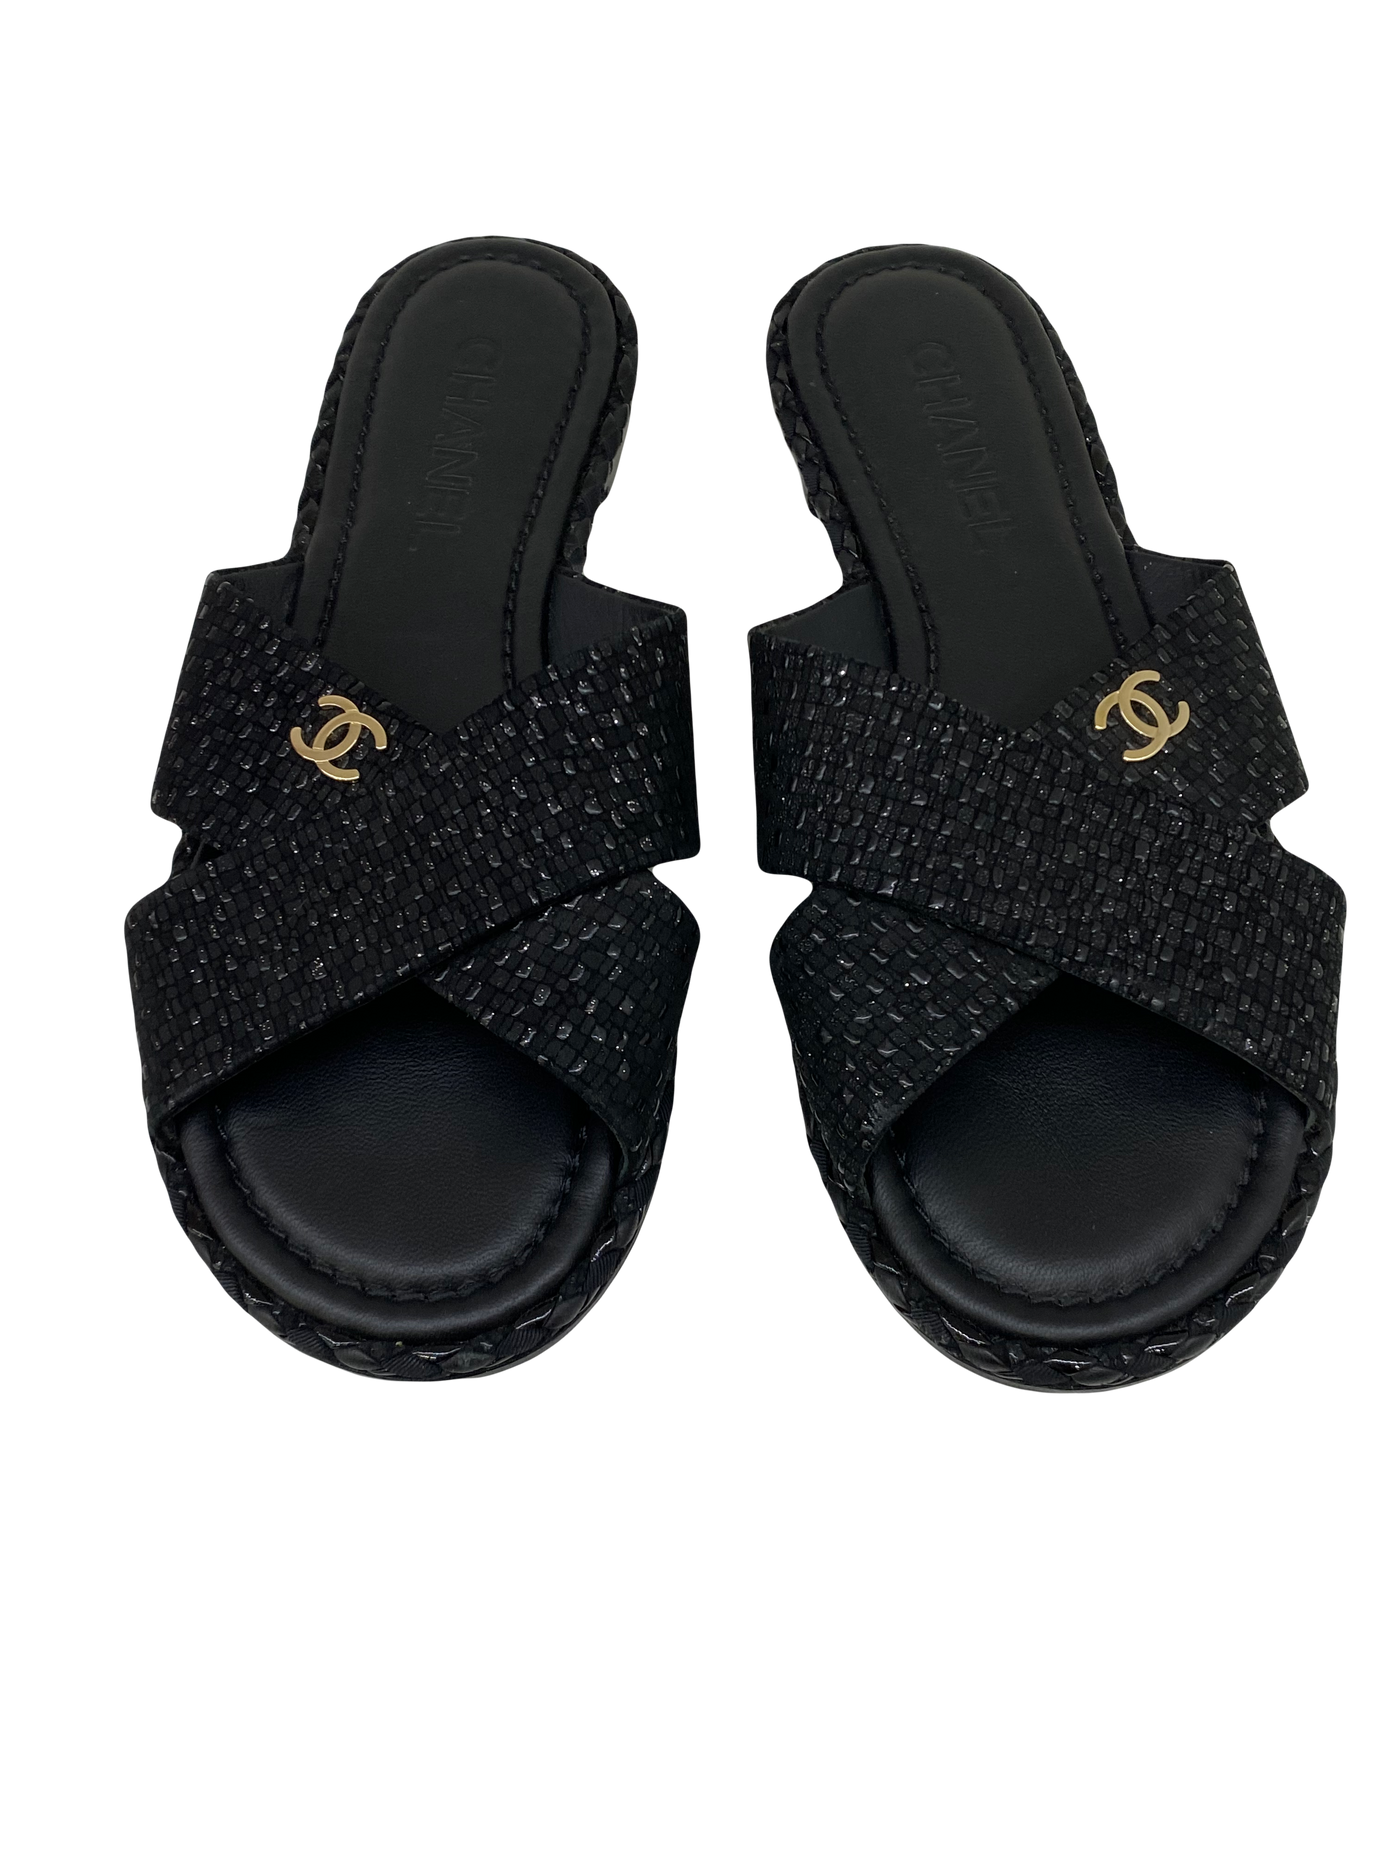 Chanel Black Crossover sandals - Size 39